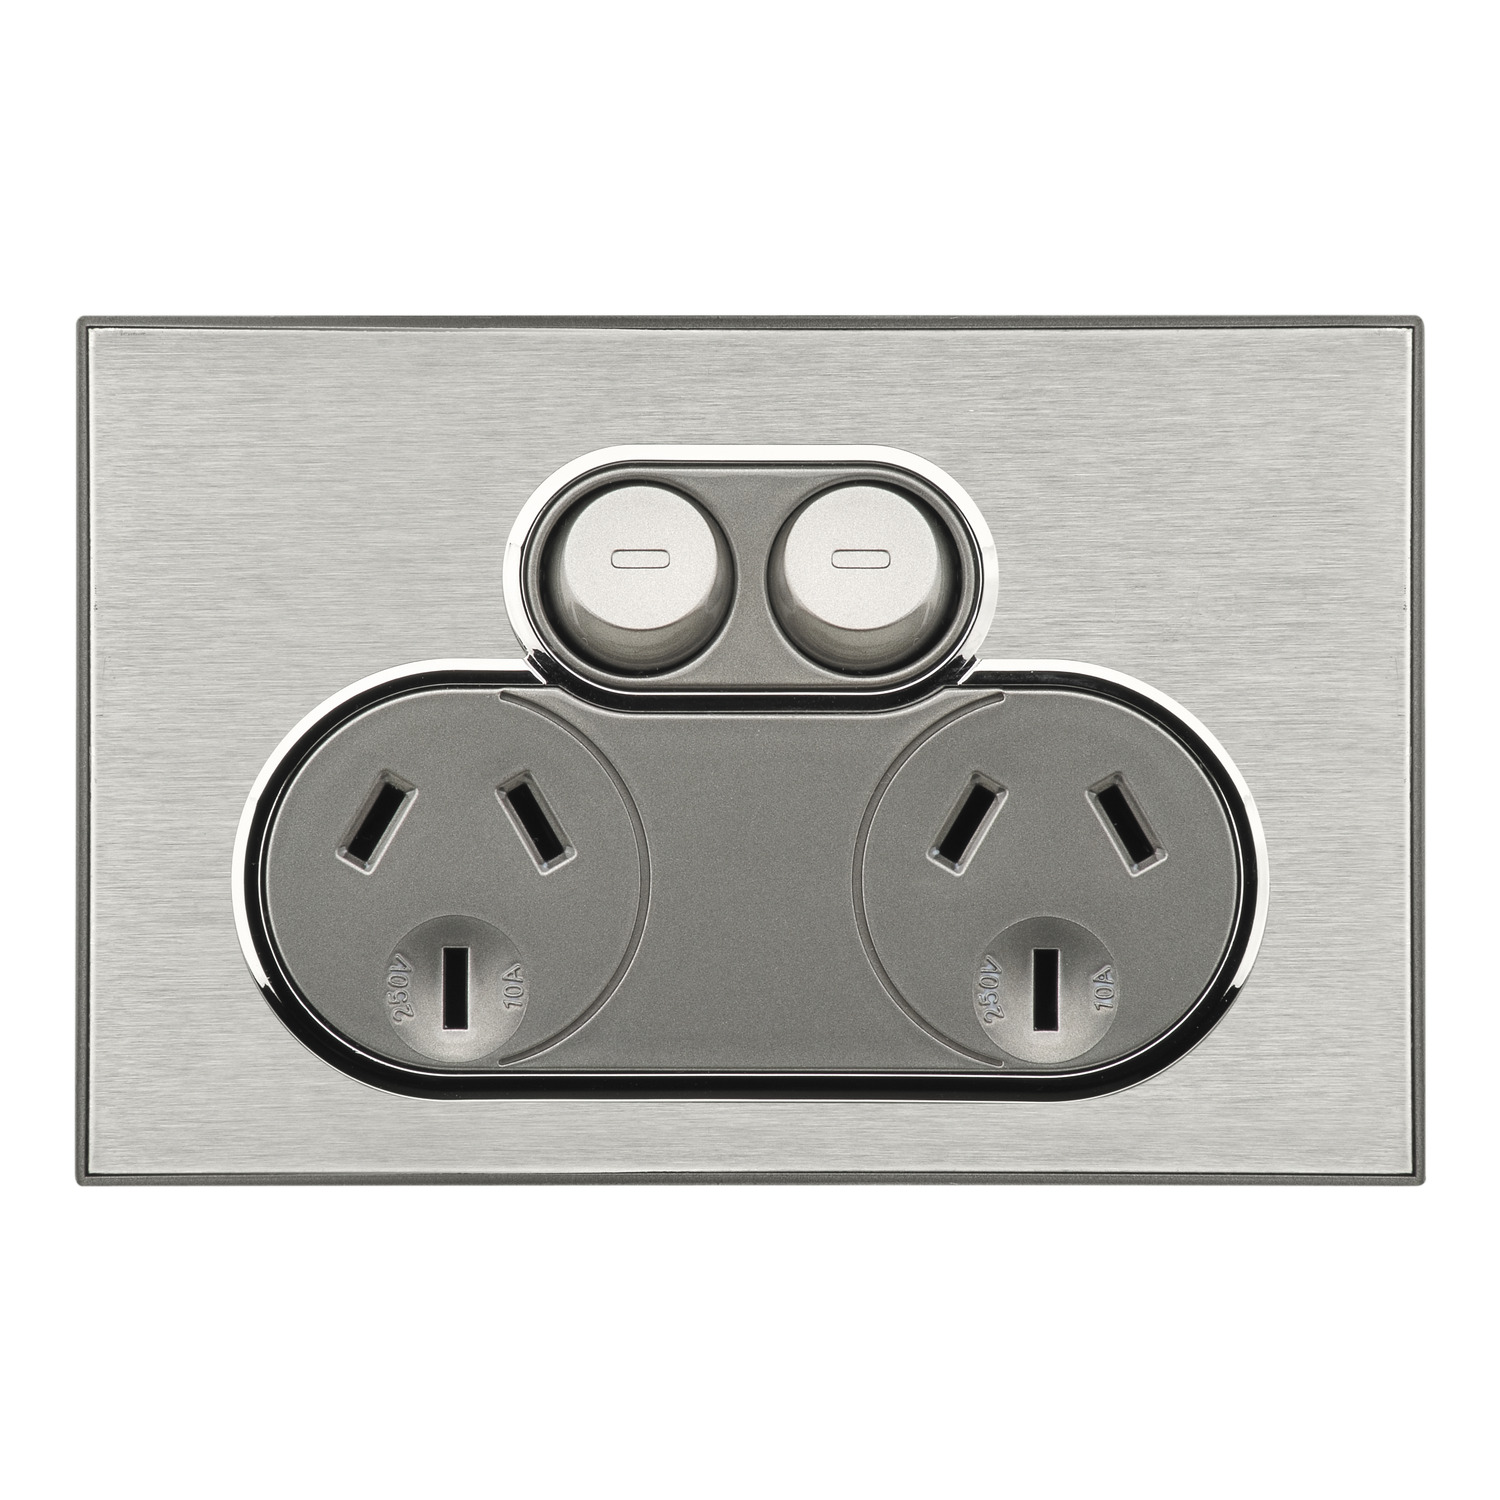 Socket Outlets - Saturn 4000 Series, double 250V 10A